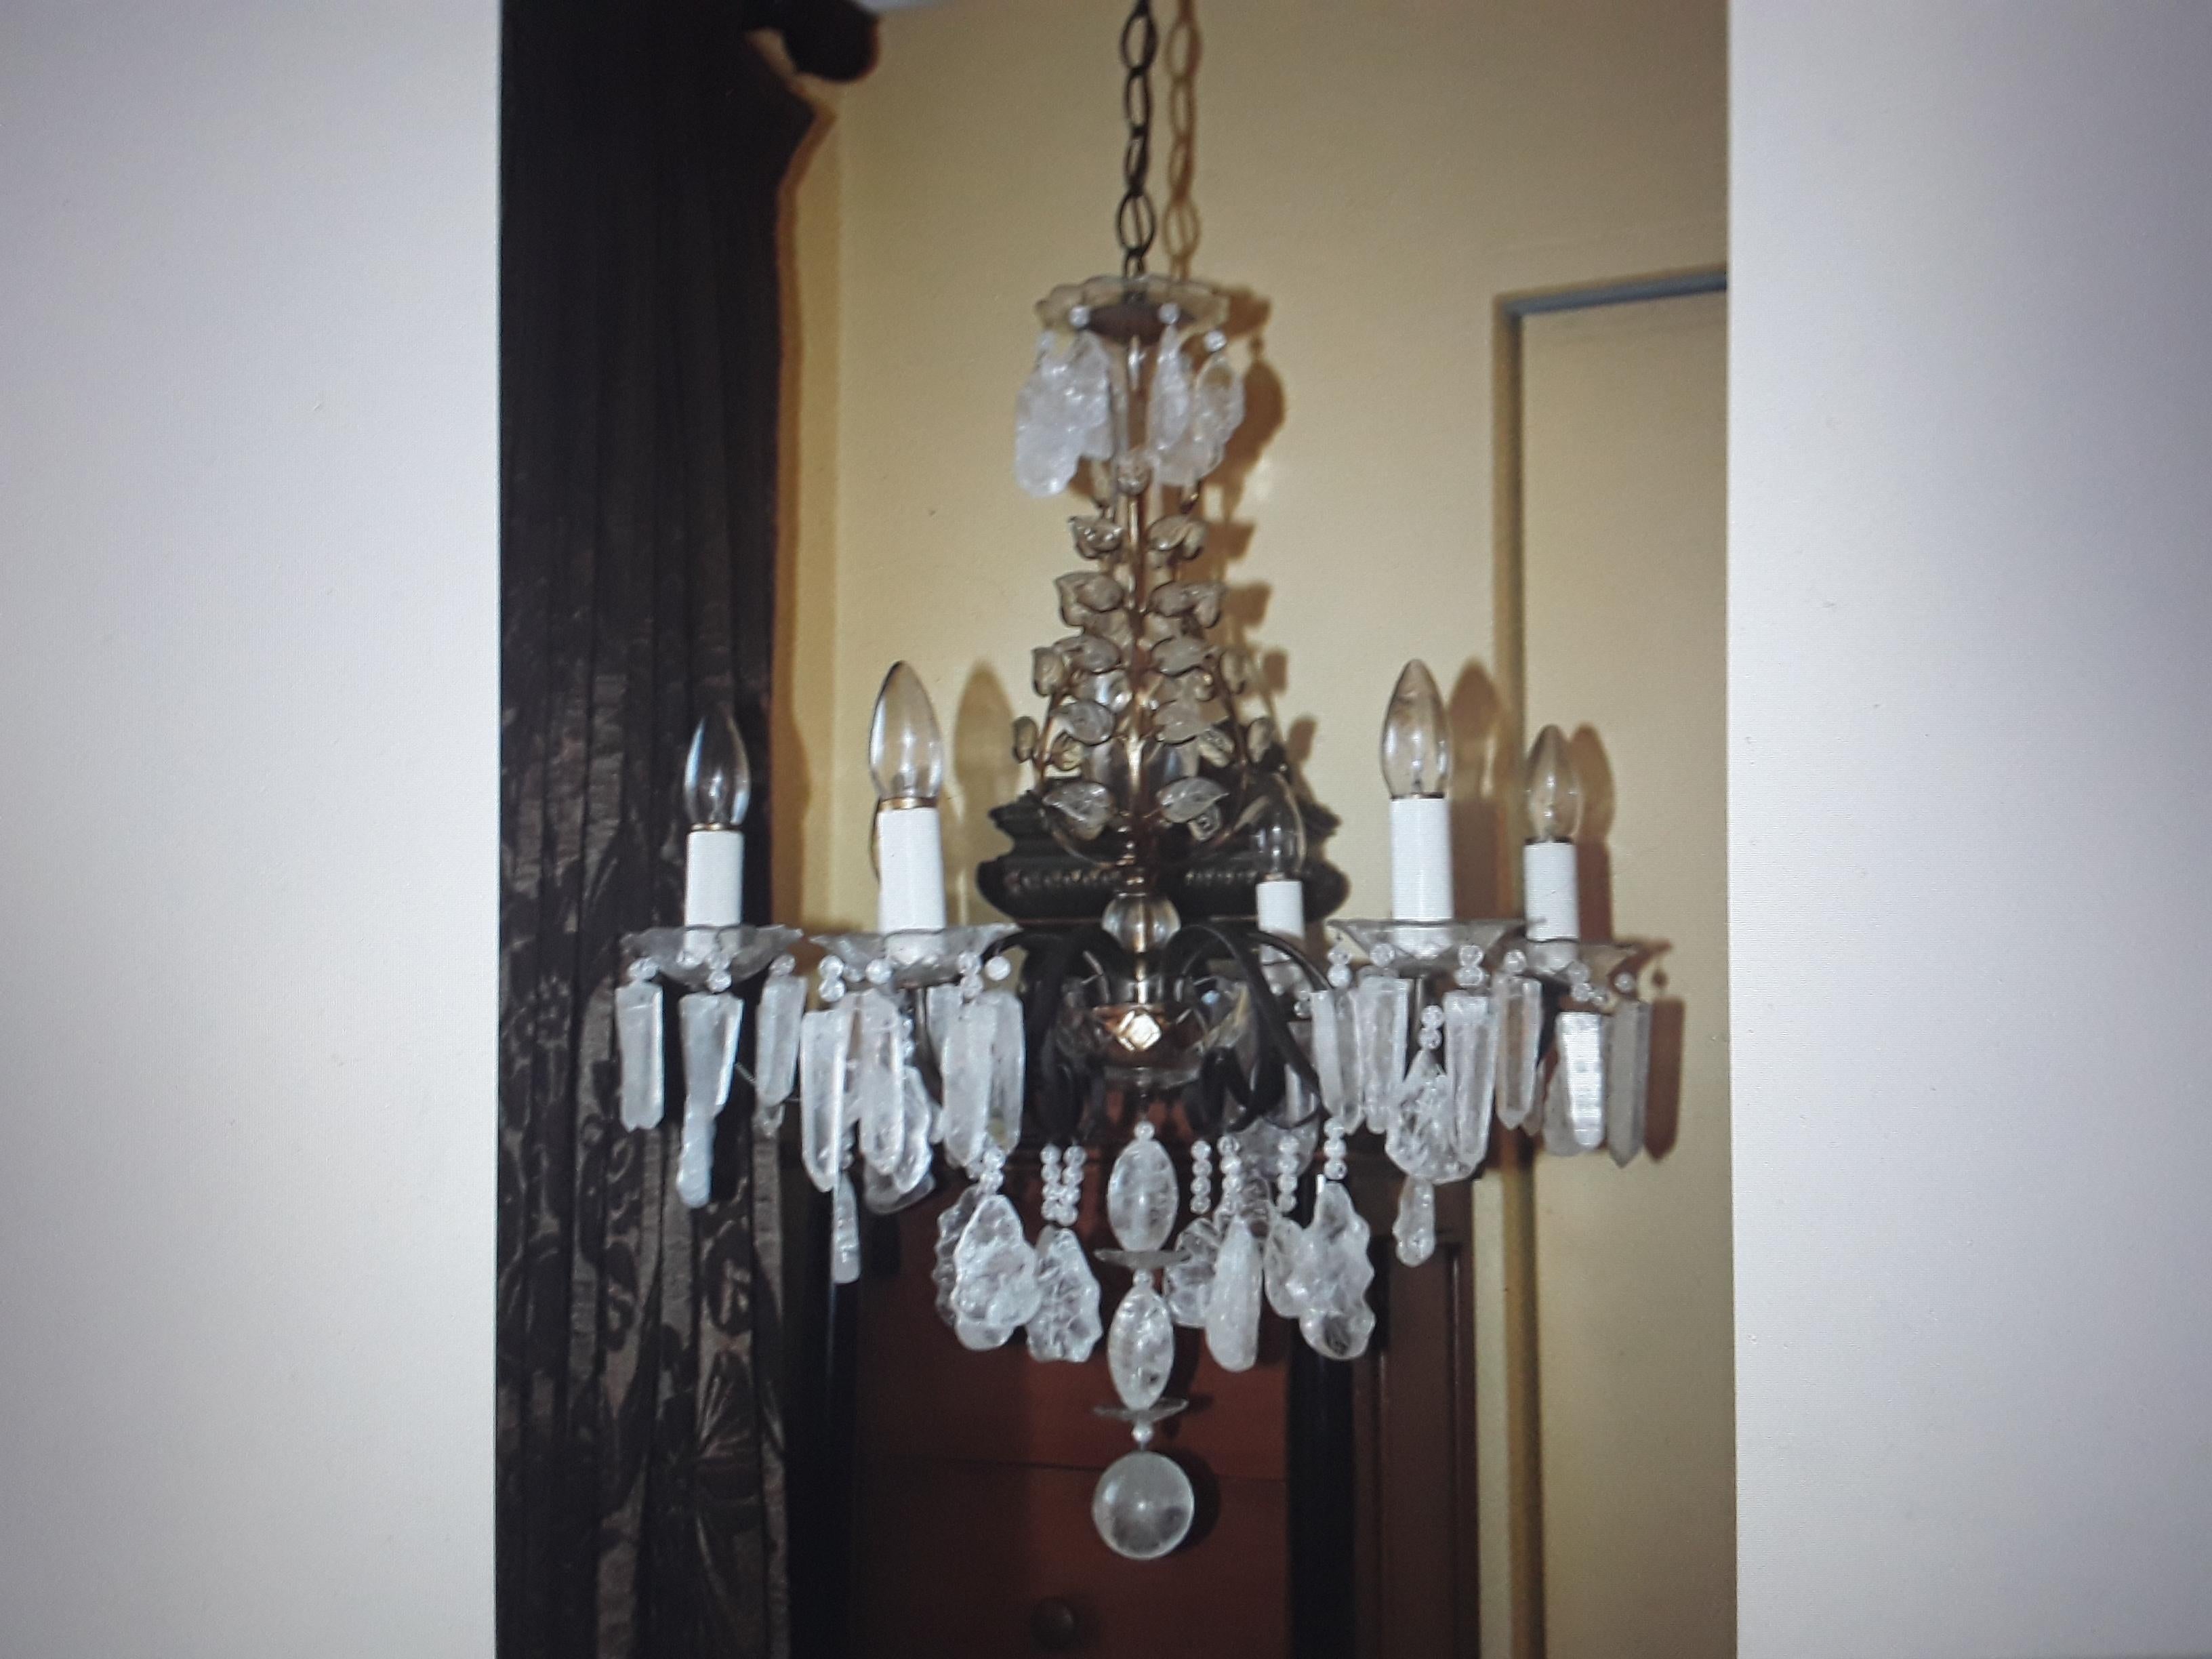 Amazing 1940's French Hollywood Regency Rock Crystal Chandelier. Petals, Vines and Stalactites featured. This is a very special chandelier for sure! Found on sale in Paris.